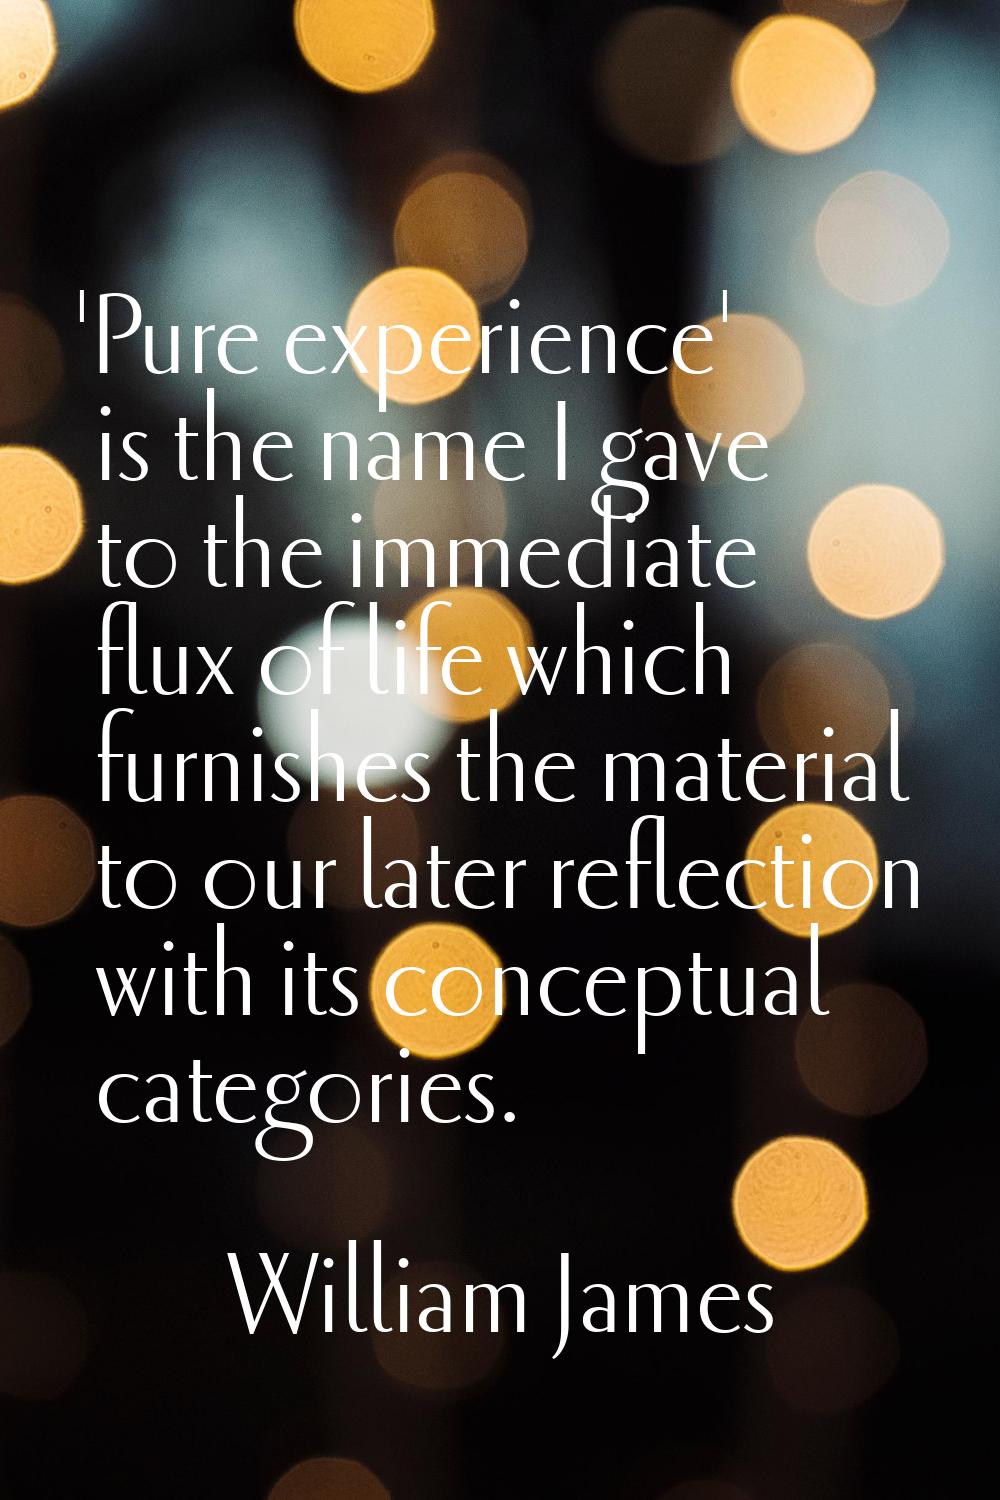 'Pure experience' is the name I gave to the immediate flux of life which furnishes the material to 